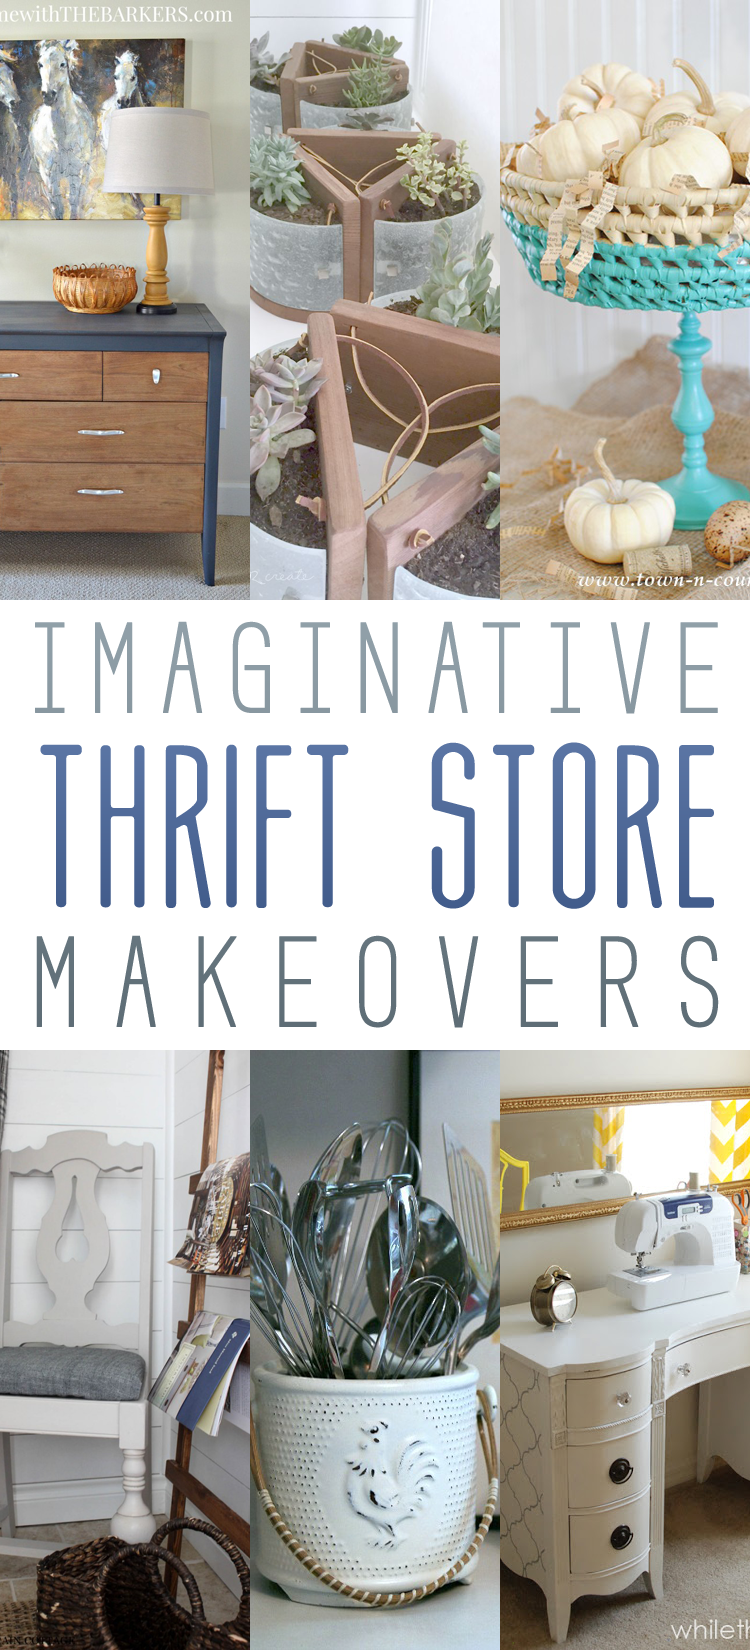 http://thecottagemarket.com/wp-content/uploads/2015/09/ThriftStore-TOWERR01.png